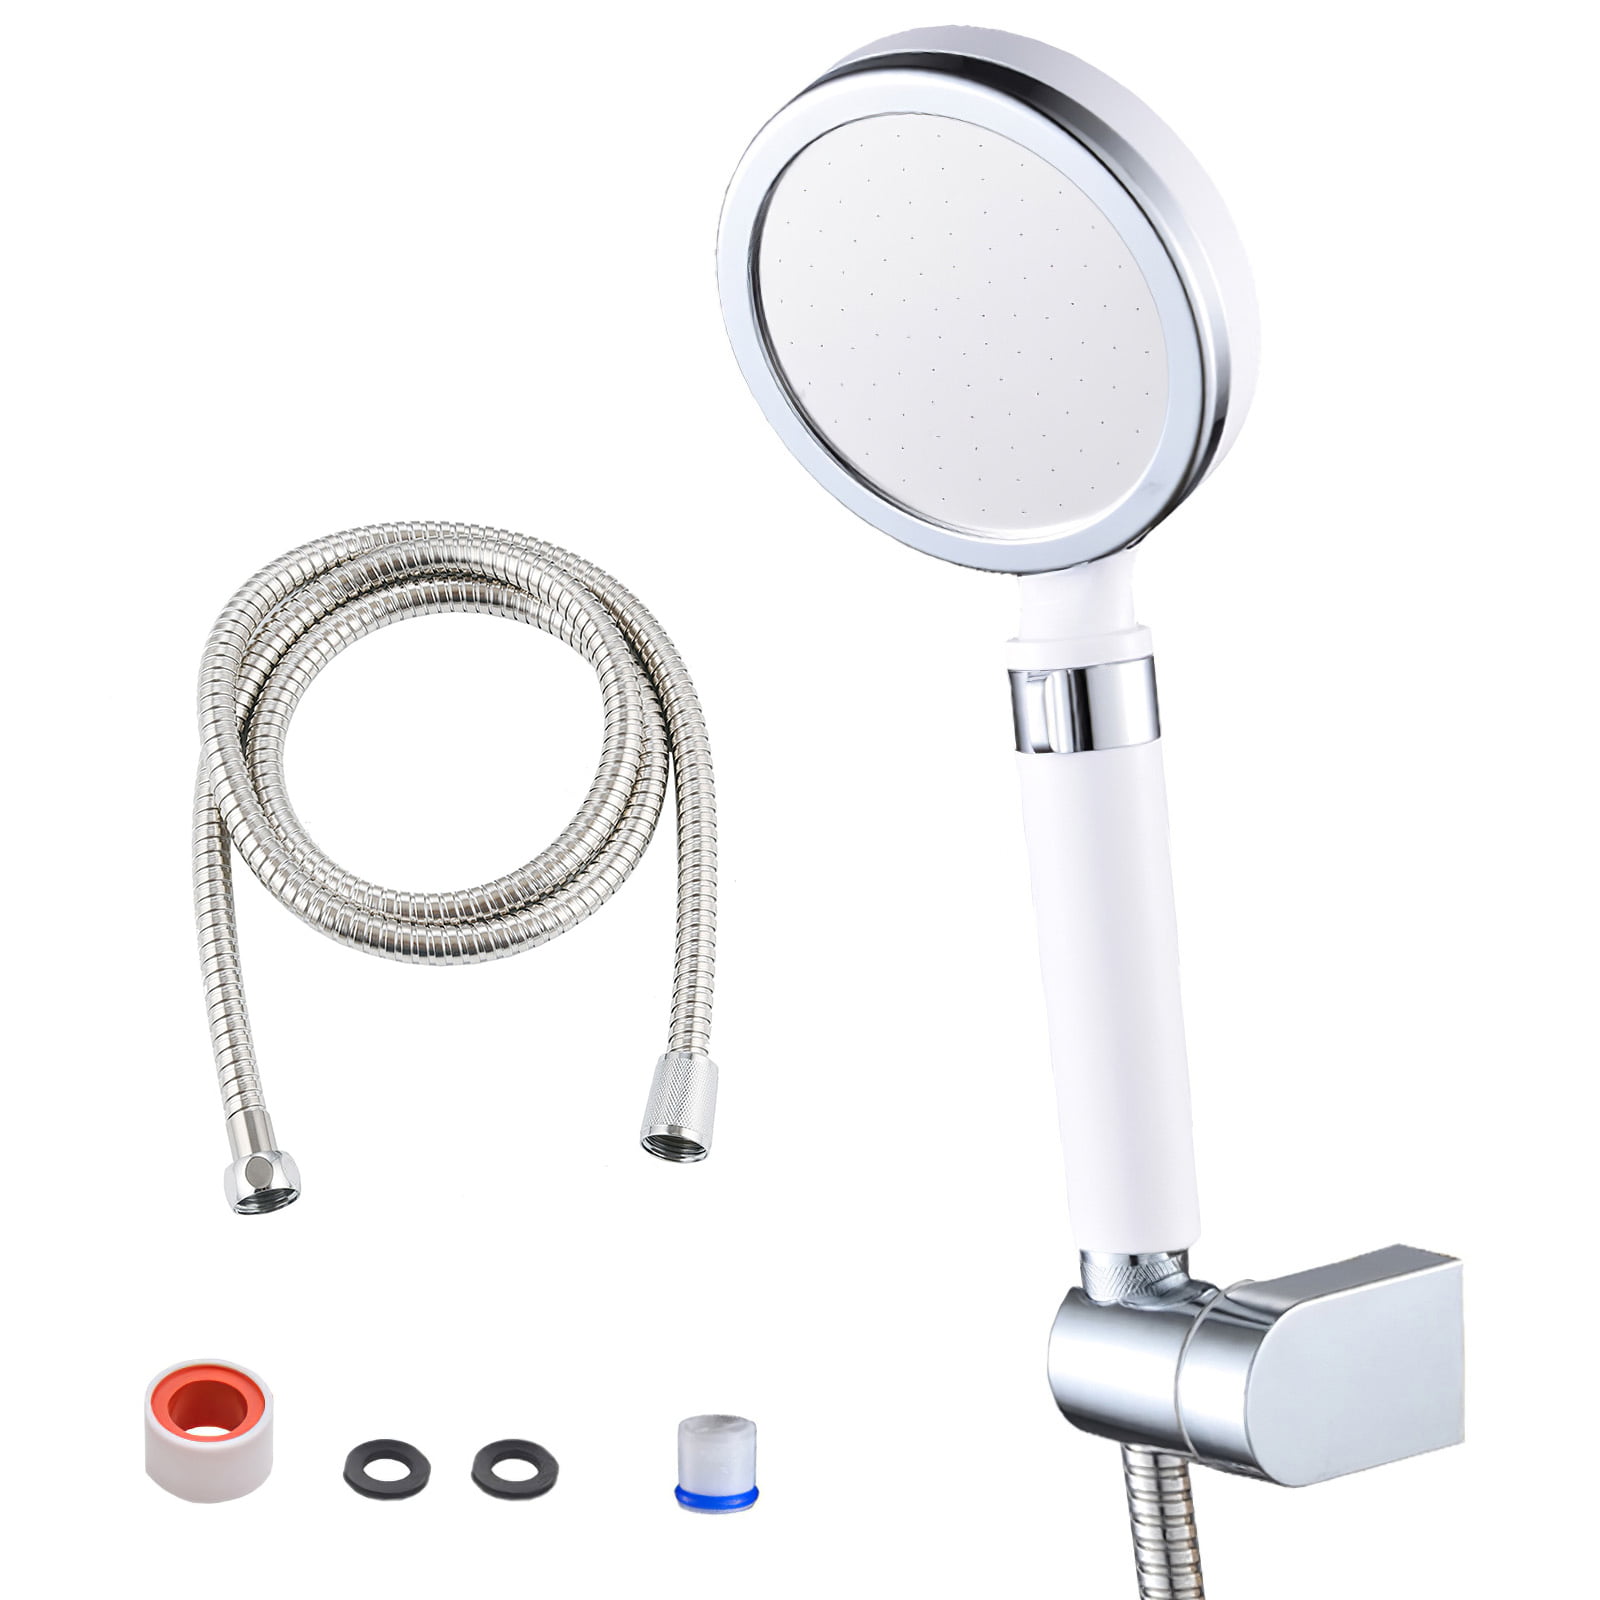 LED Shower Magnetic Therapy SPA Dechlorination Shower Pressurized Shower Nozzle 